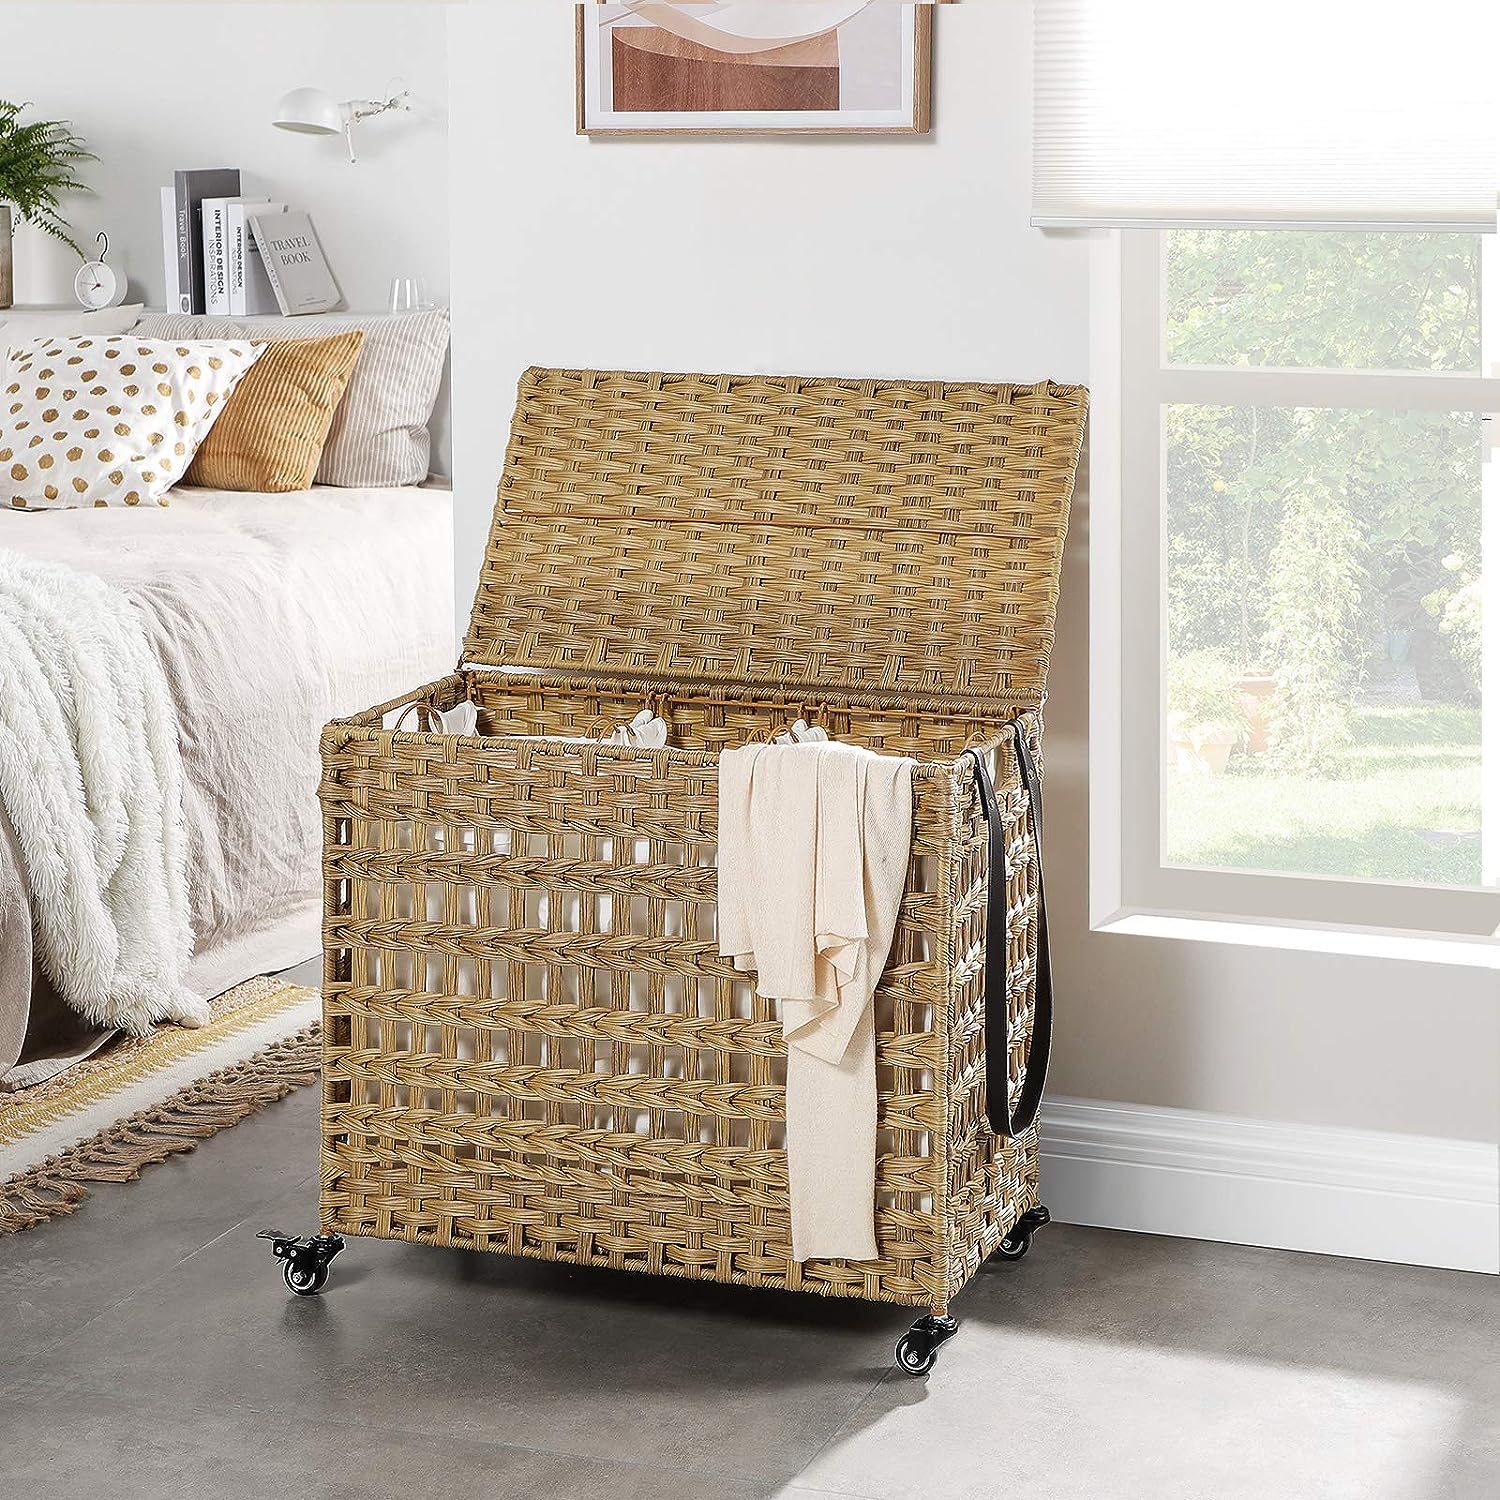 Handwoven Laundry Basket with Lid, Rattan-Style Laundry Hamper with 3 Separate Compartments